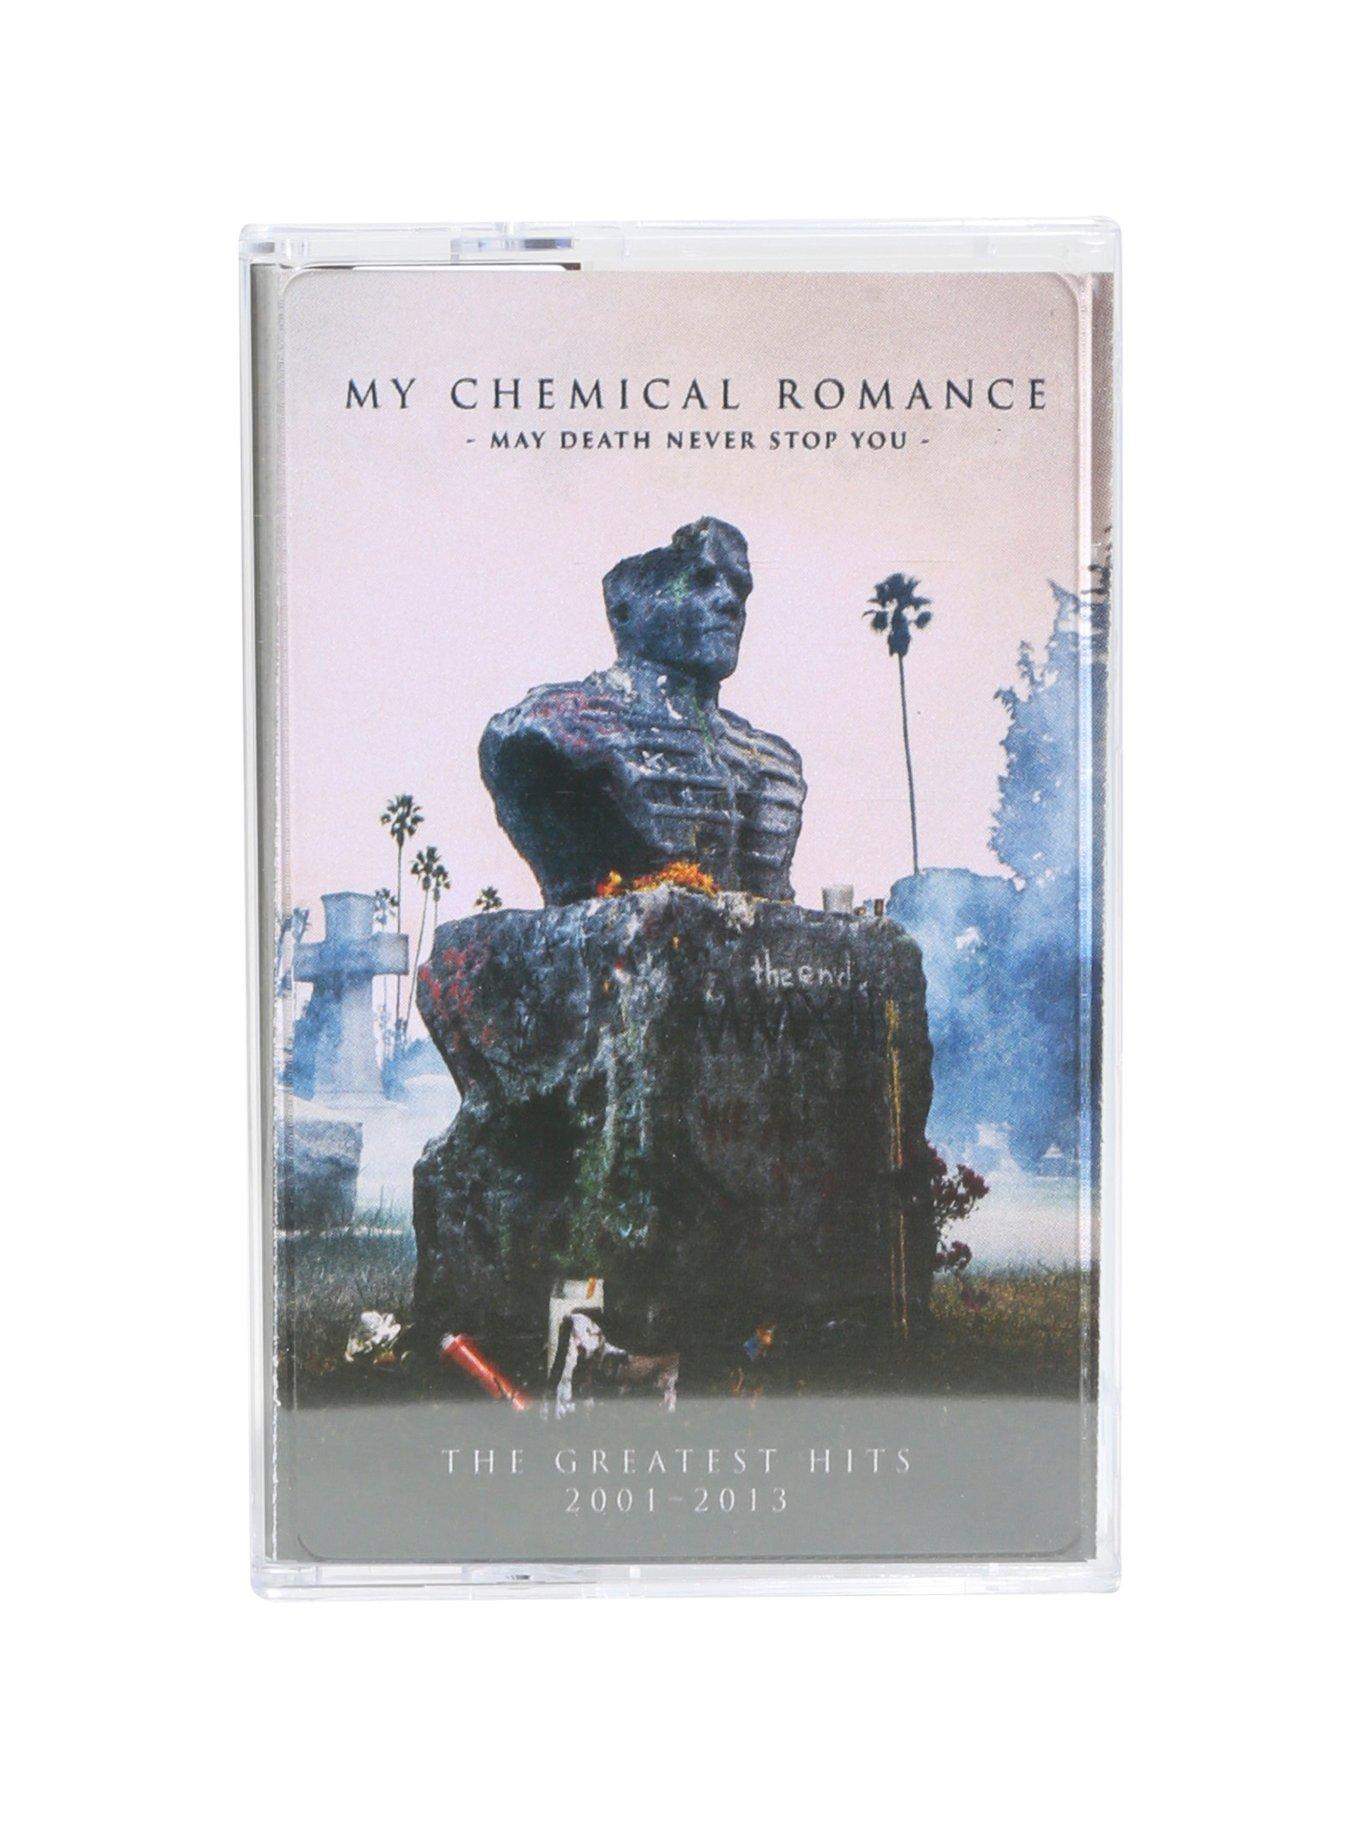 My Chemical Romance - May Death Never Stop You The Greatest Hits 2001-2013 Cassette, , hi-res